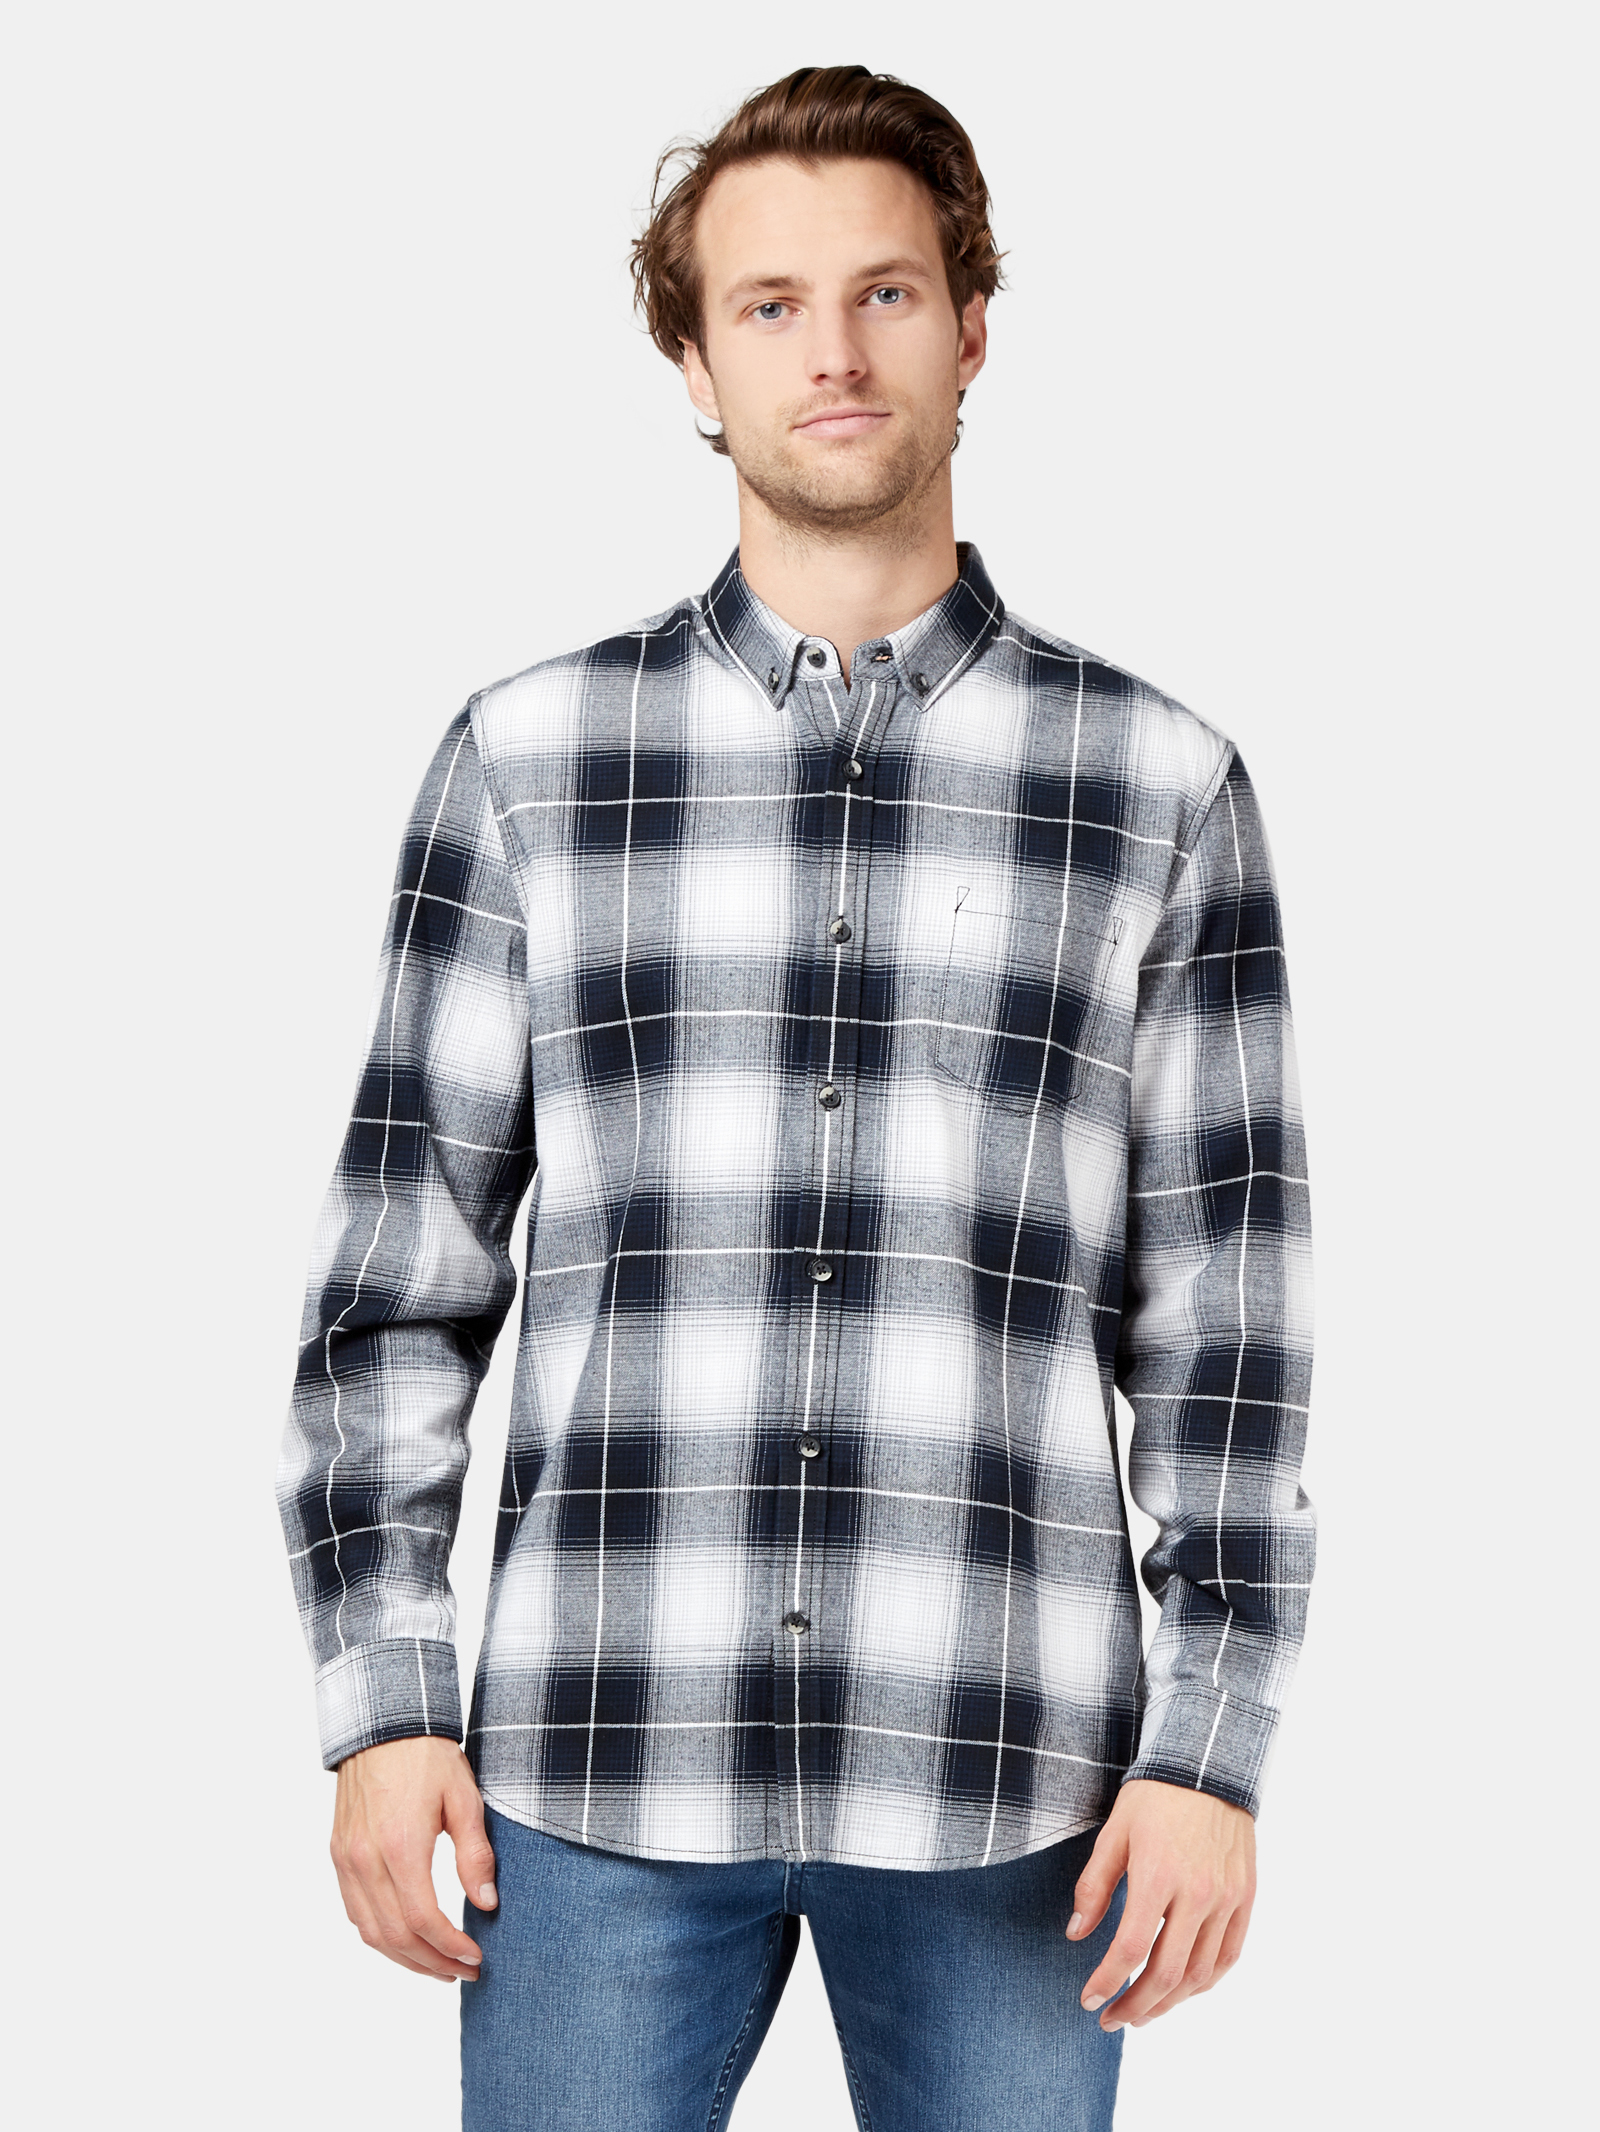 Xander Long Sleeve Check Shirt | Jeanswest